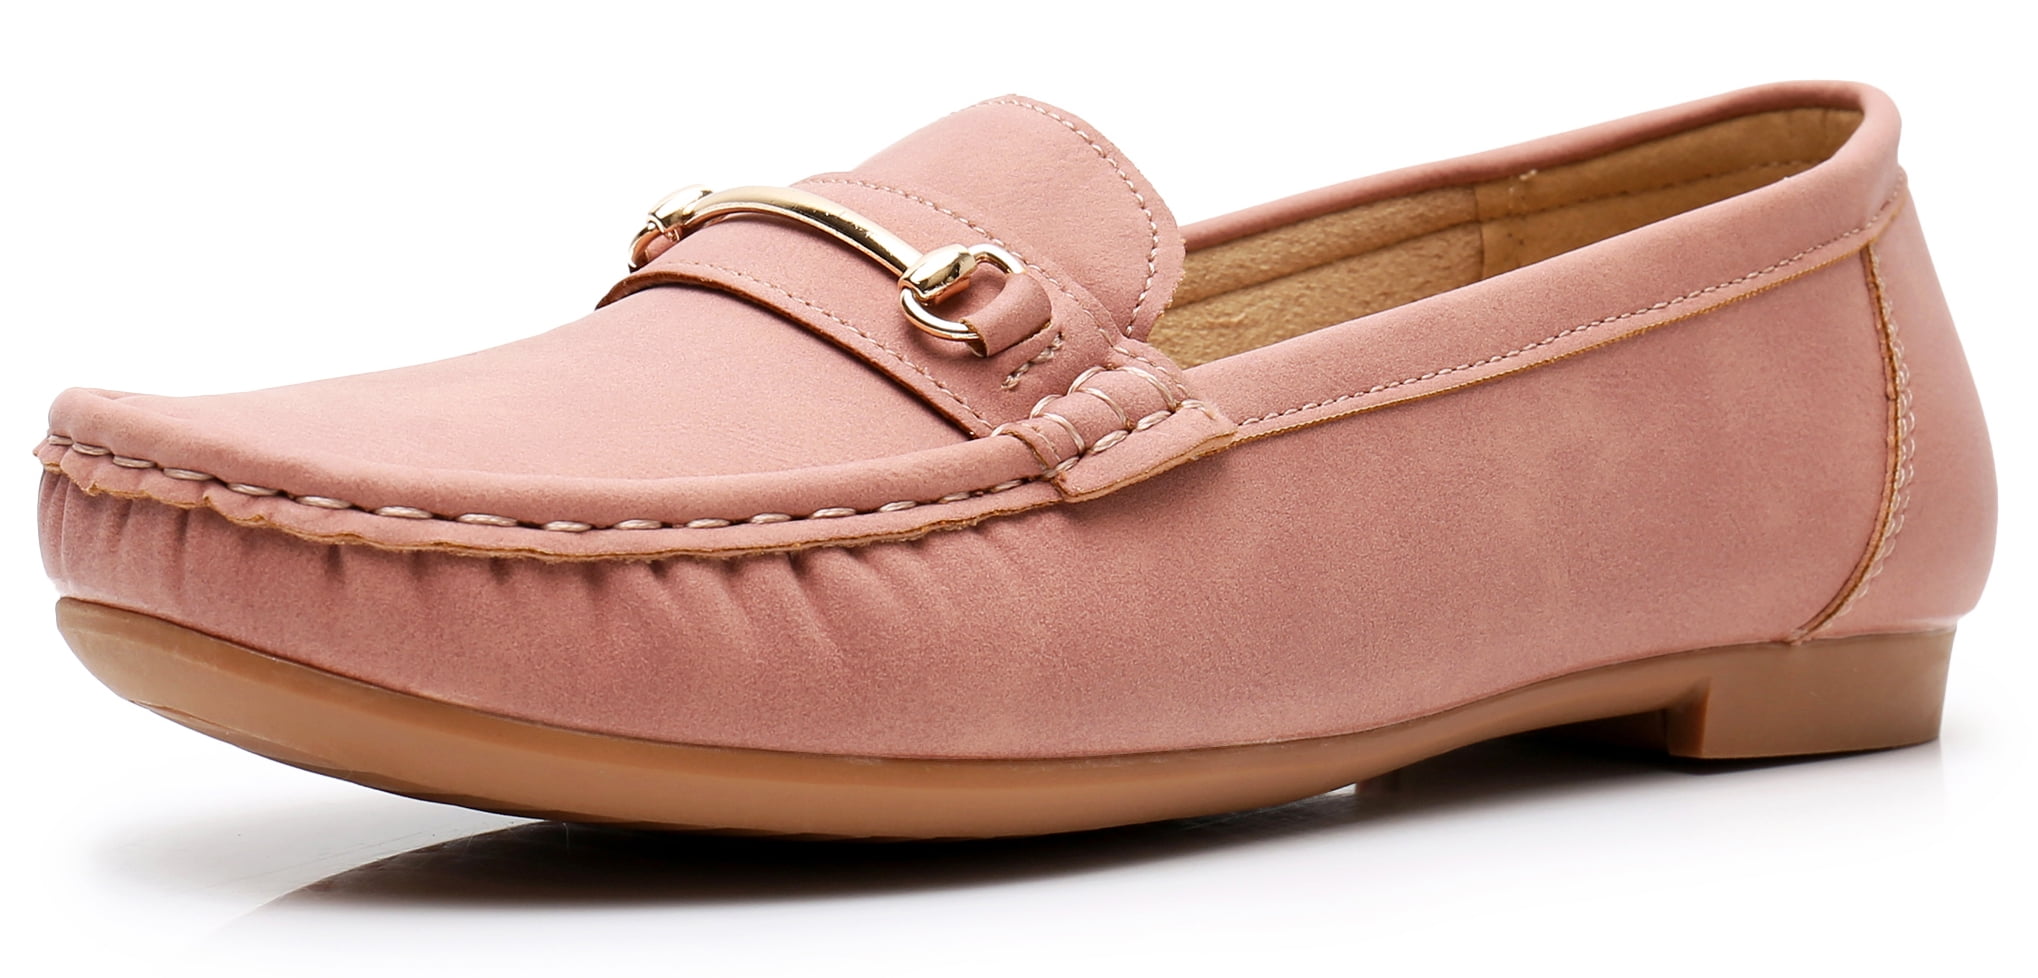 Maichal Loafers for Women Slip On Leather Comfort Rubber Sole Flats Shoes 